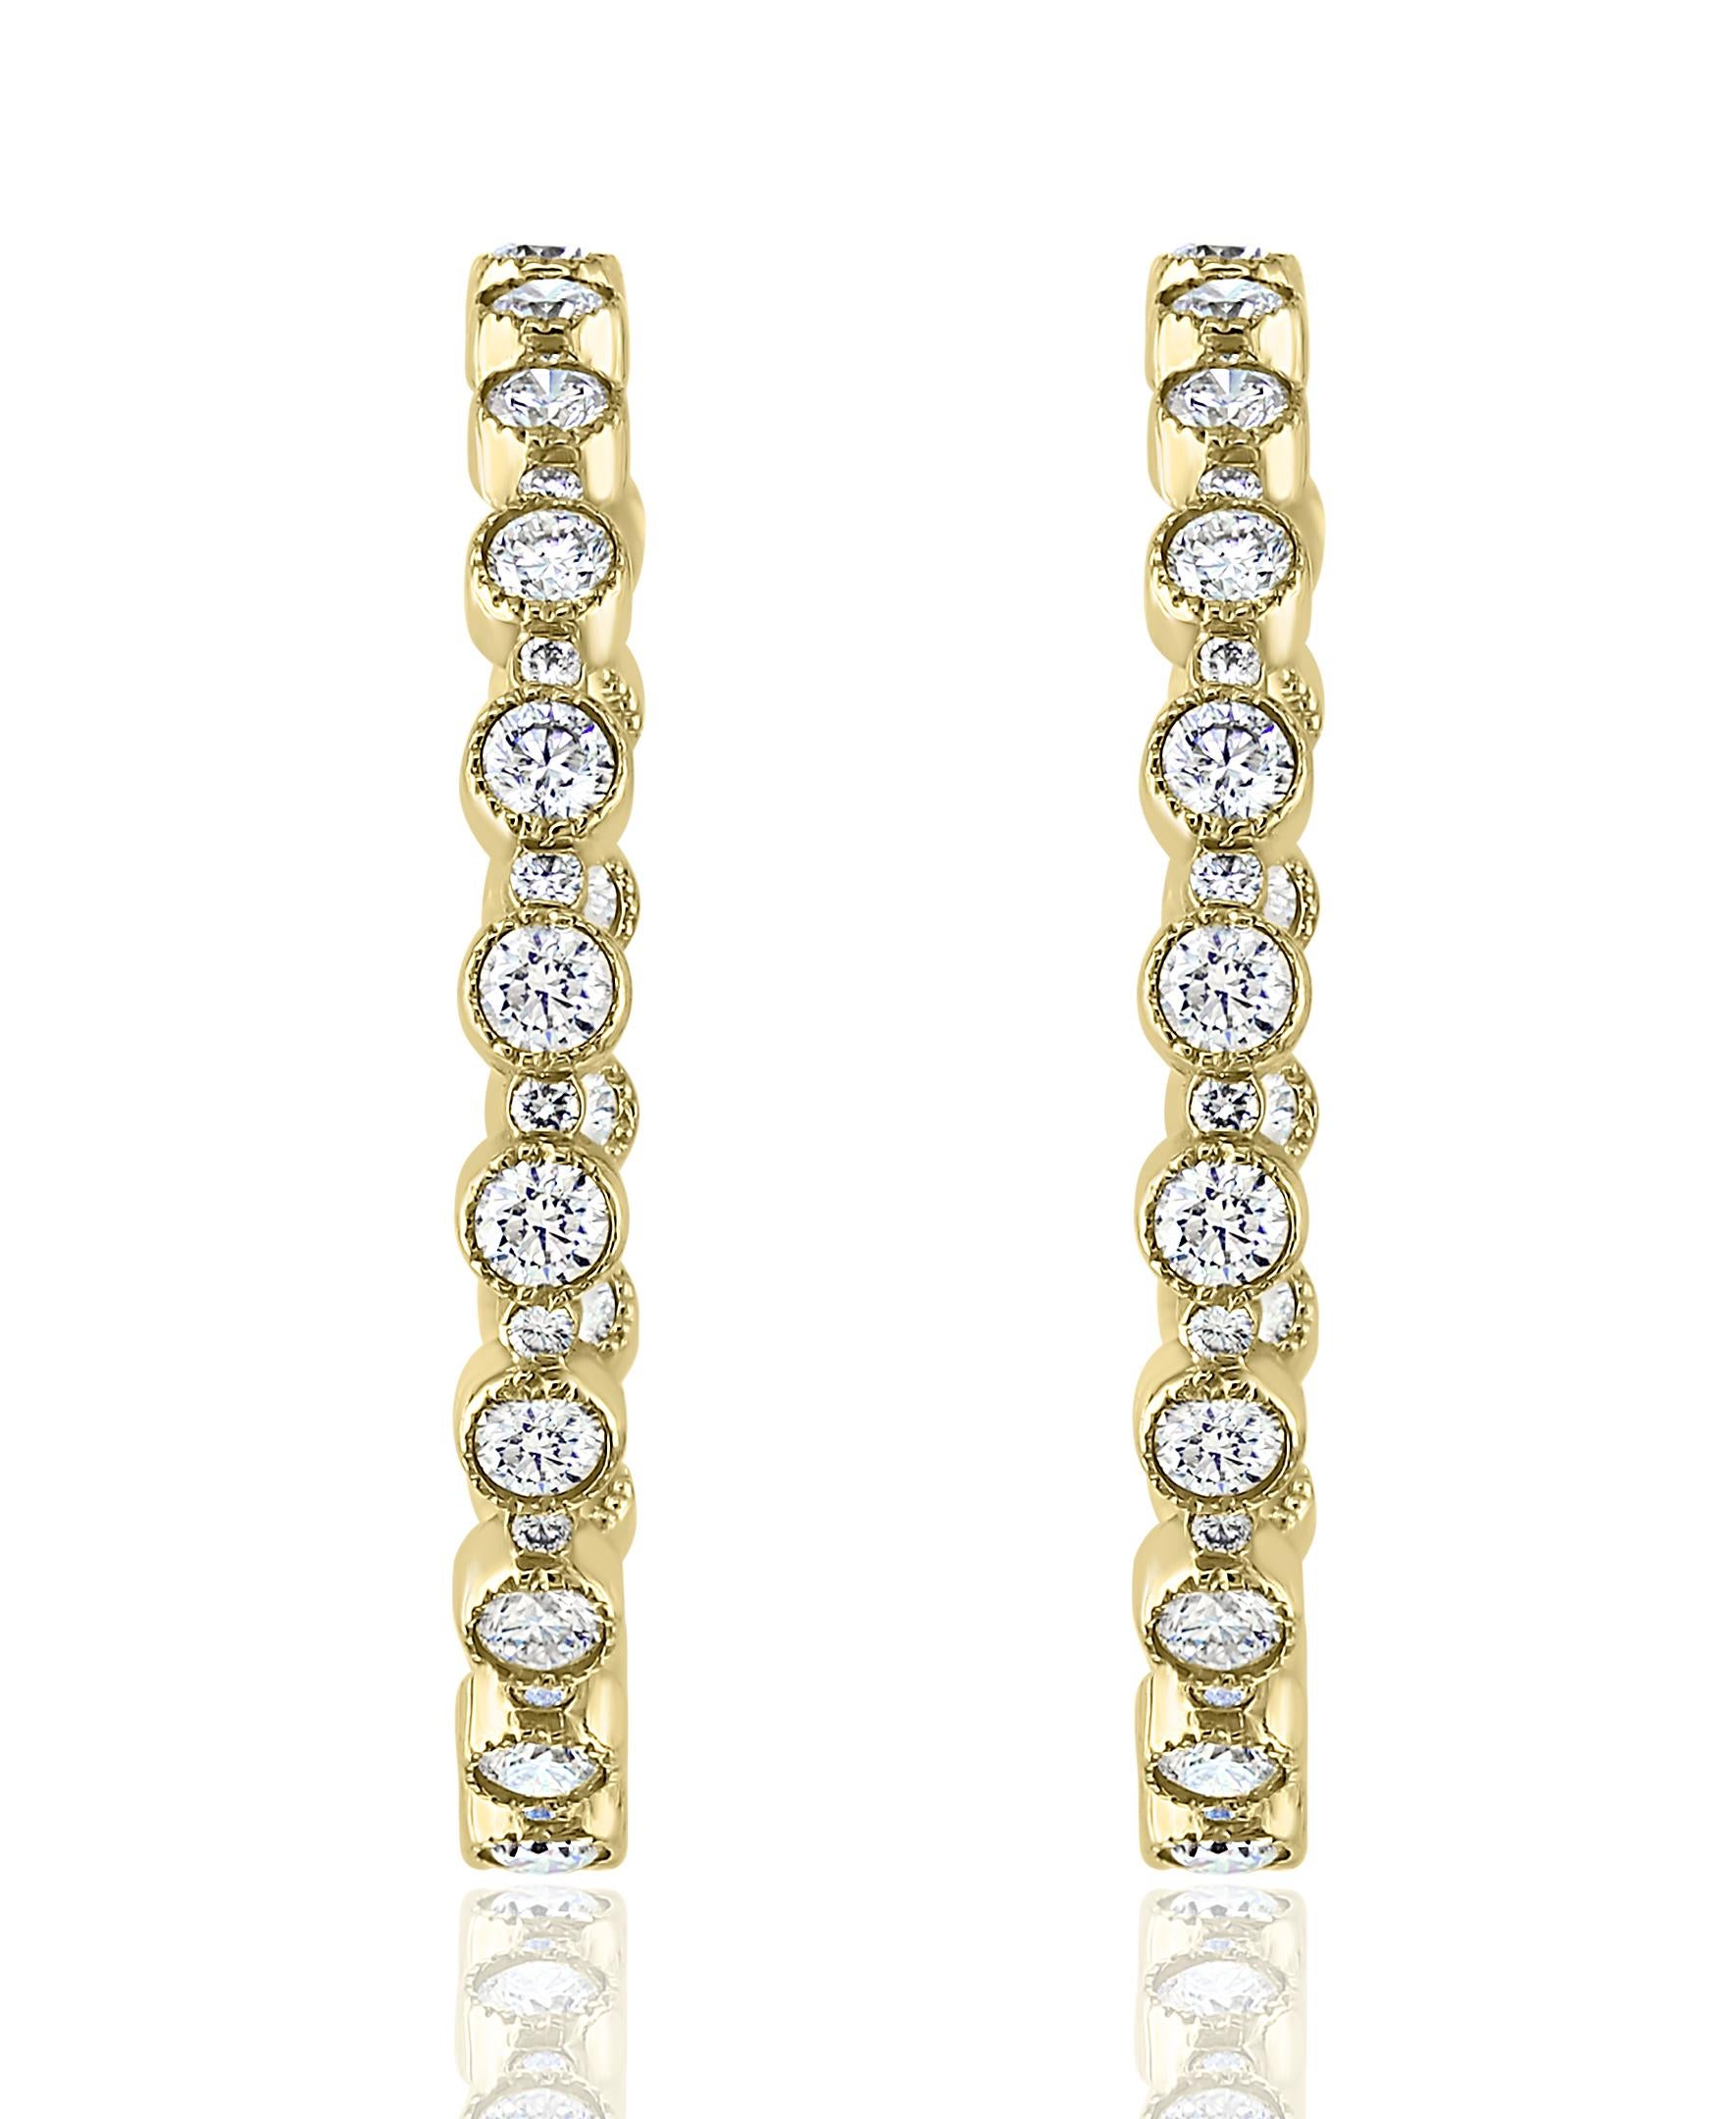 Contemporary 5.57 Carat Round Diamond Hoop Earrings in 14K Yellow Gold For Sale